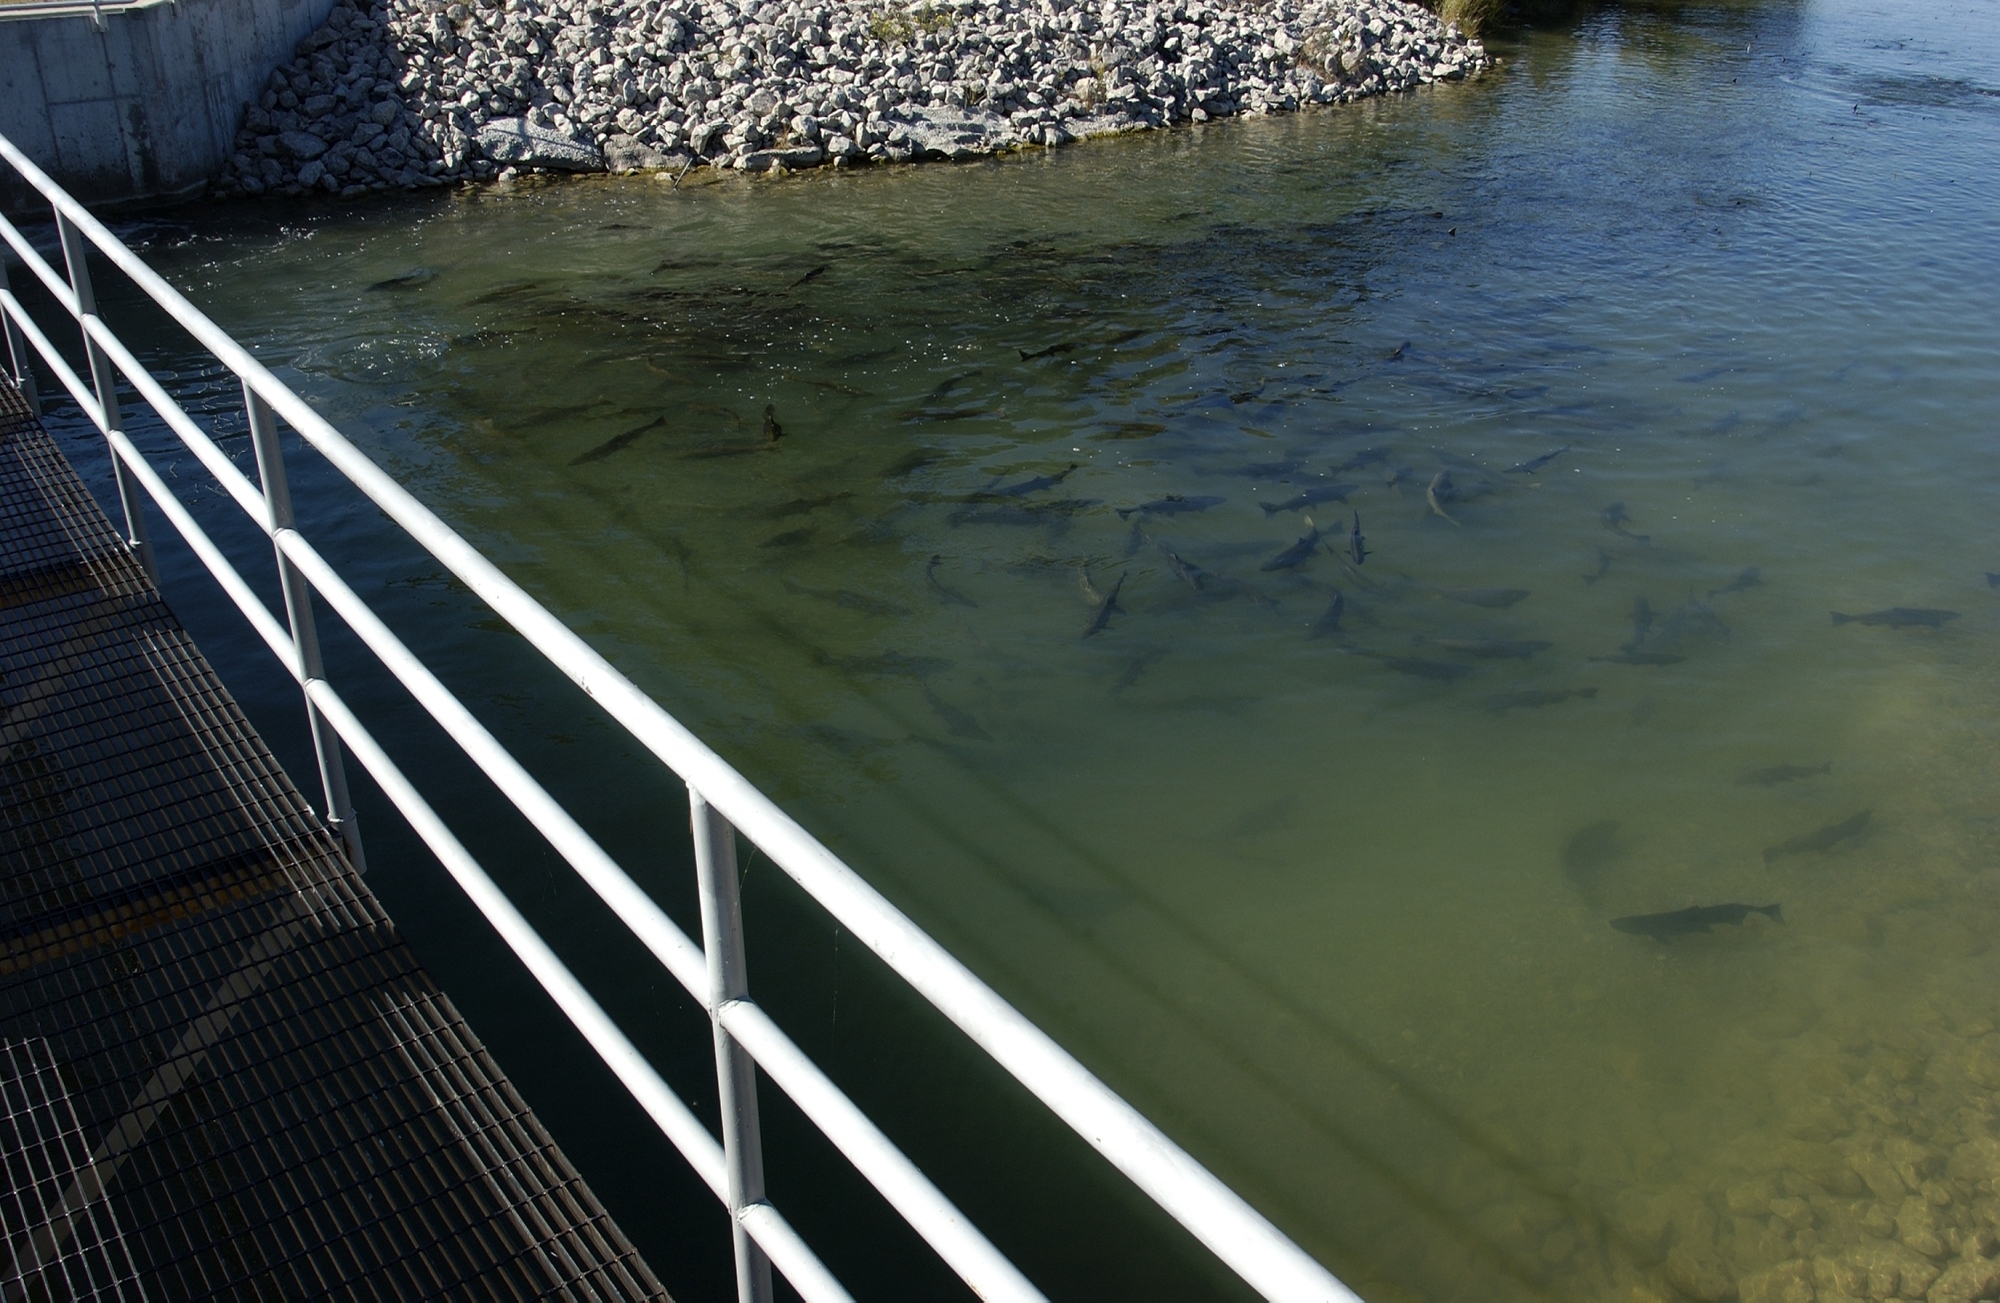 Salmon stage in the Swan River below the weir.